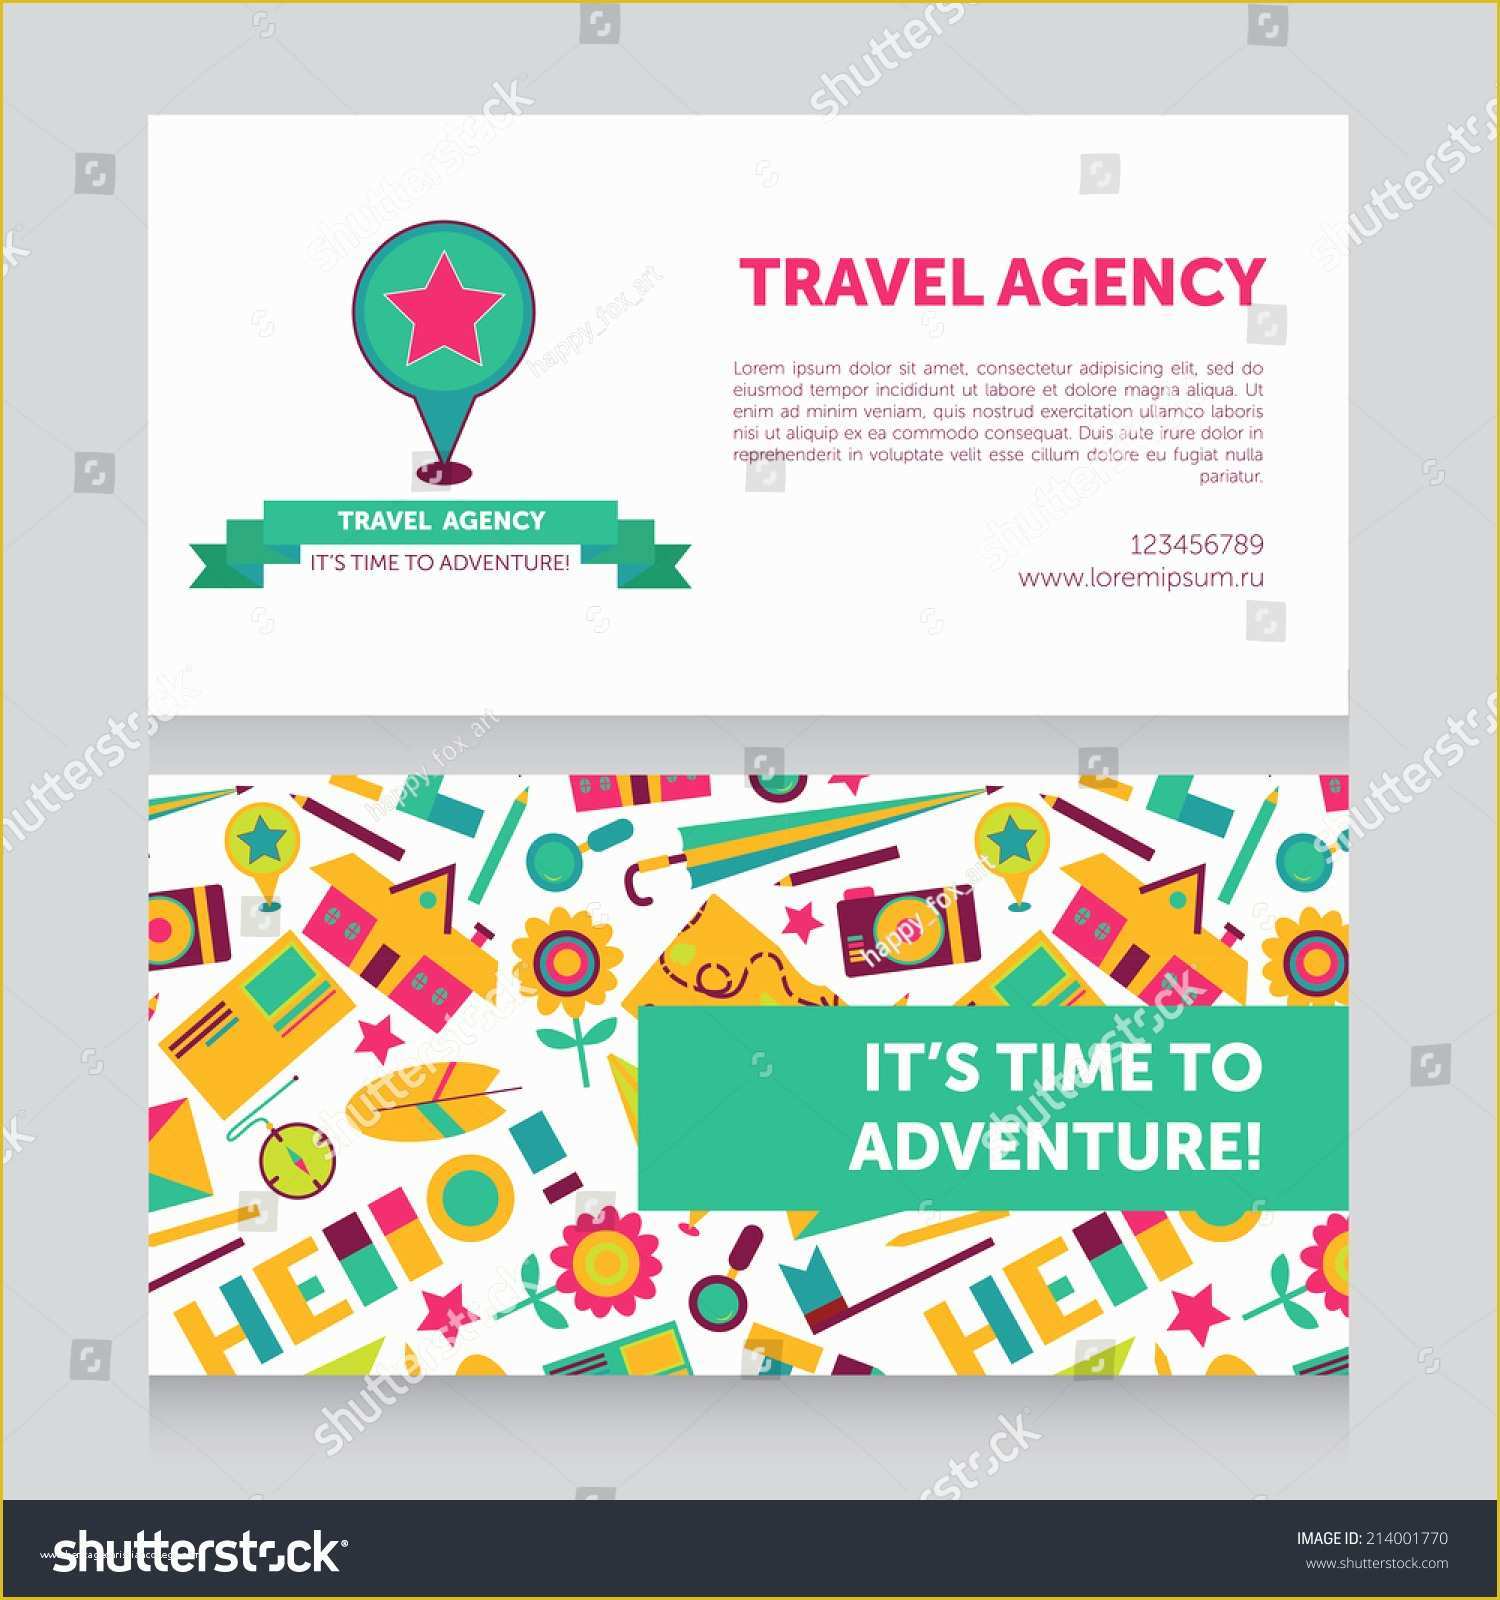 Travel Business Cards Templates Free Of Design Template Travel Agency Business Card Stock Vector